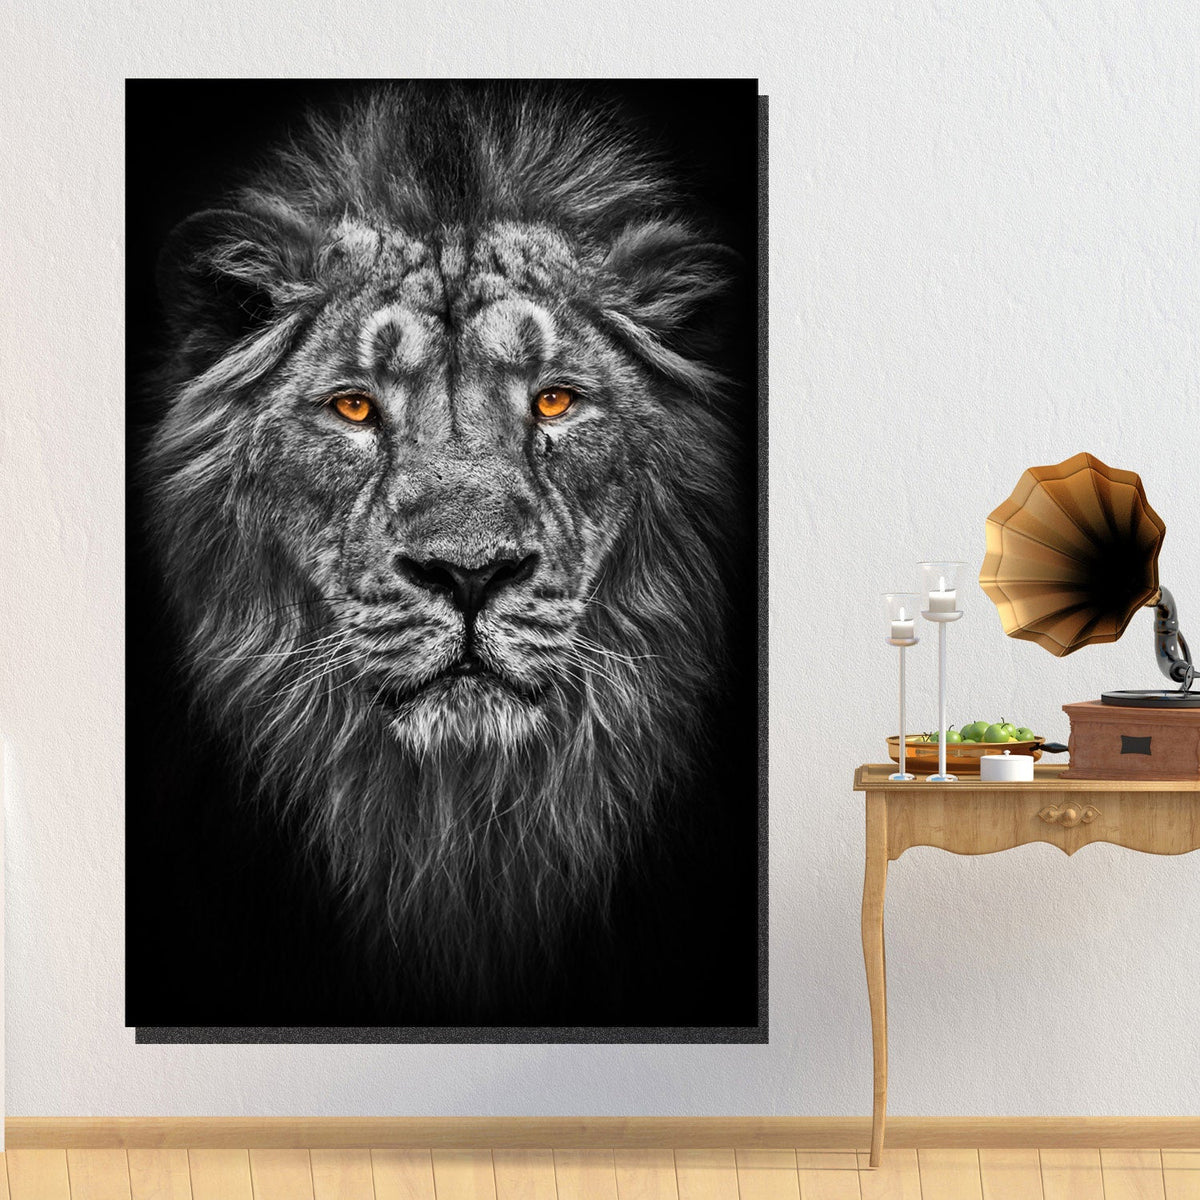 https://cdn.shopify.com/s/files/1/0387/9986/8044/products/LionwithOrangeEyesCanvasArtprintStretched-3.jpg